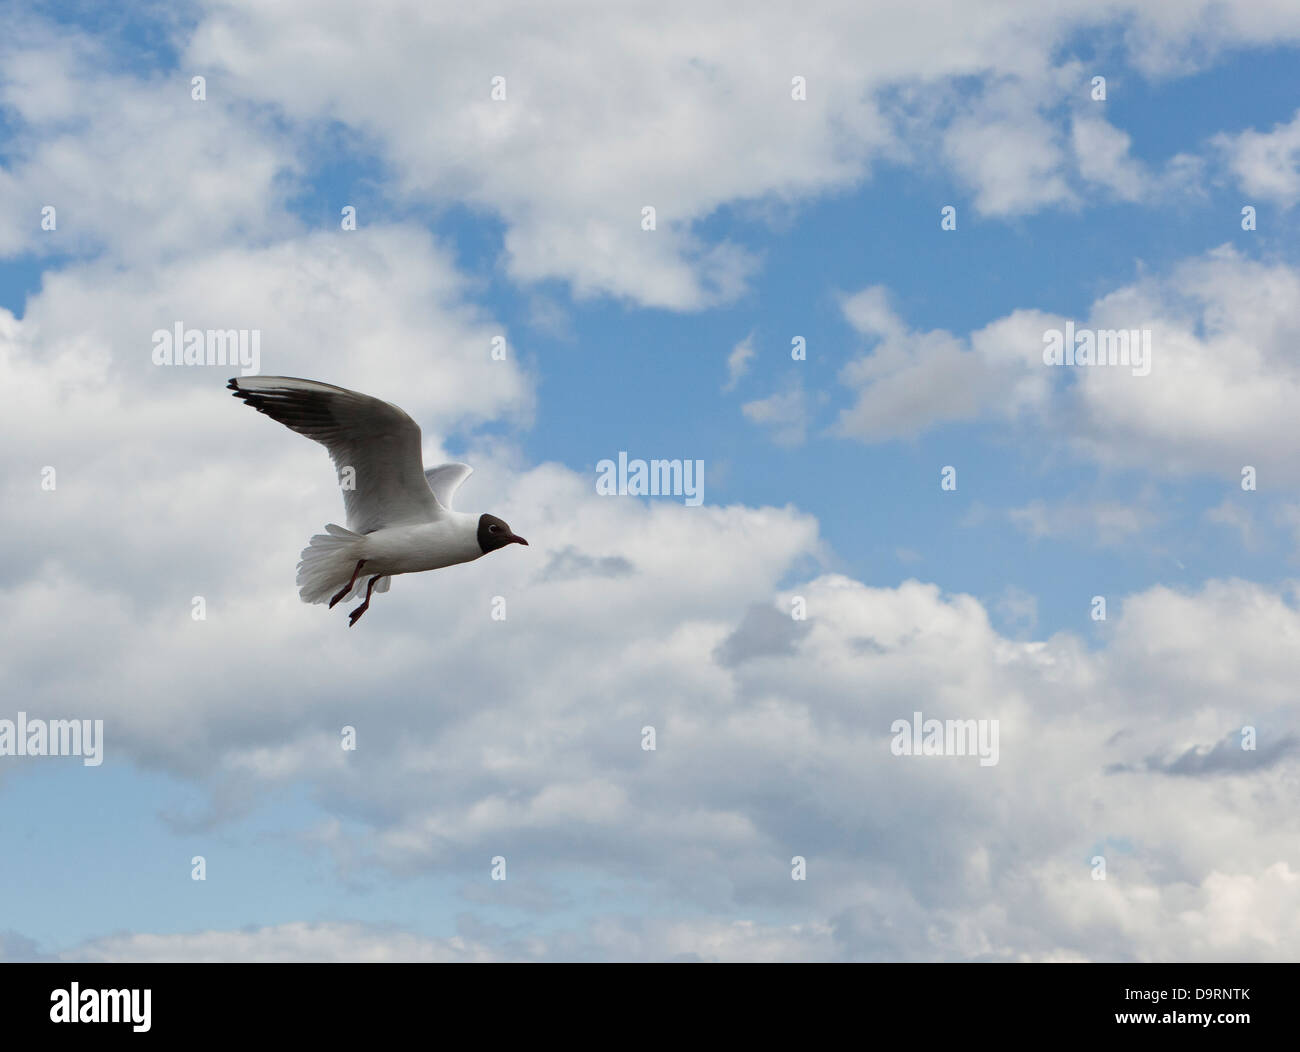 A single black headed gull flying in a cloudy blue sky Stock Photo